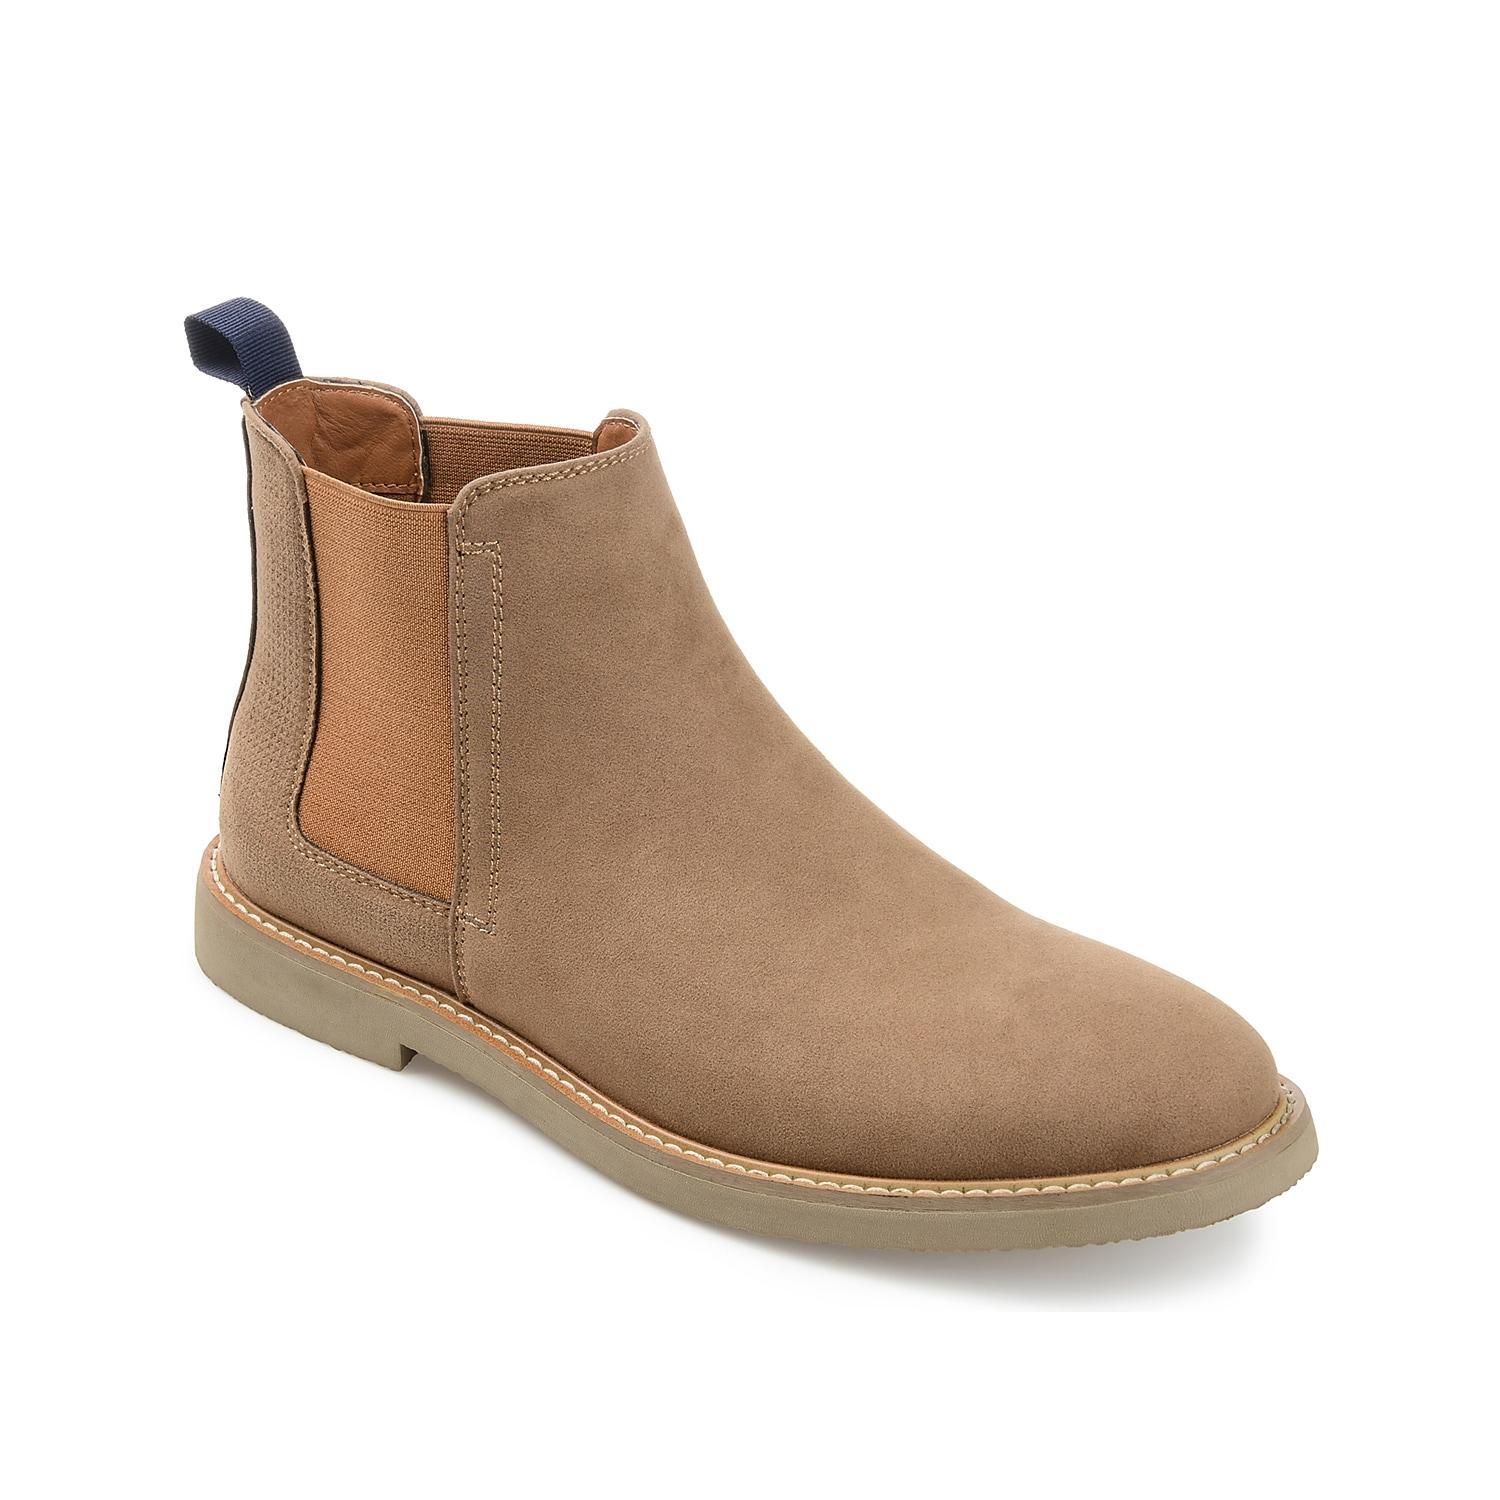 Vance Co. Marshon Mens Chelsea Boots Grey Product Image